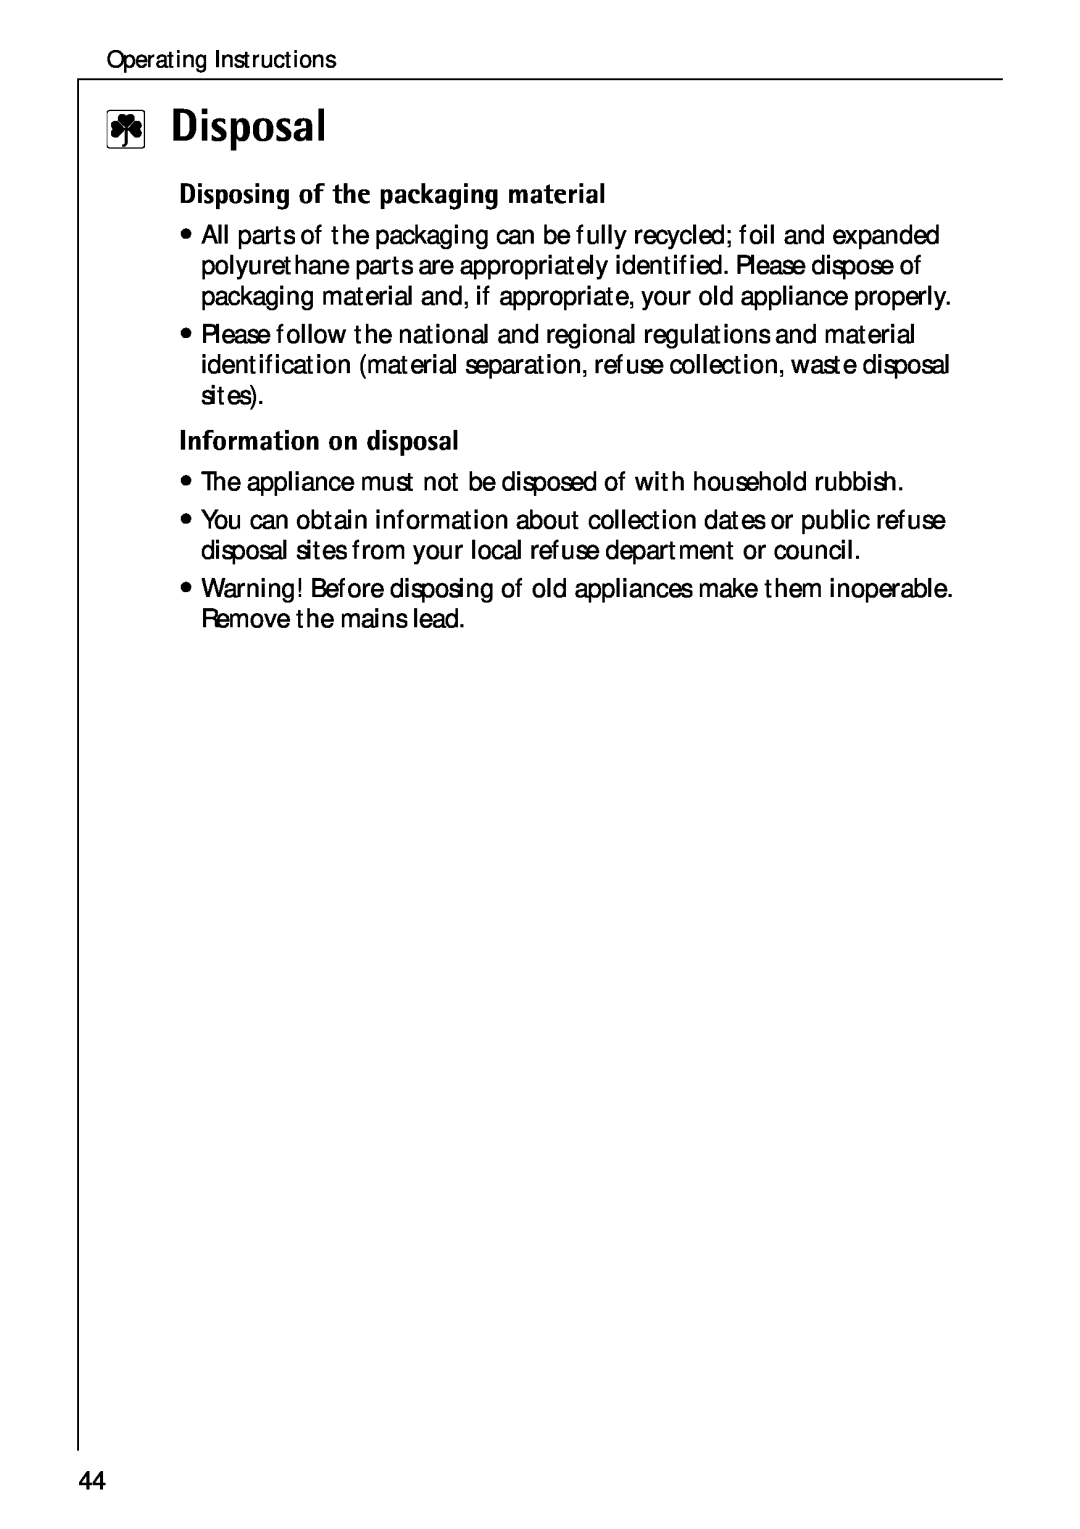 Electrolux C75301K operating instructions 2Disposal, Disposing of the packaging material, Information on disposal 